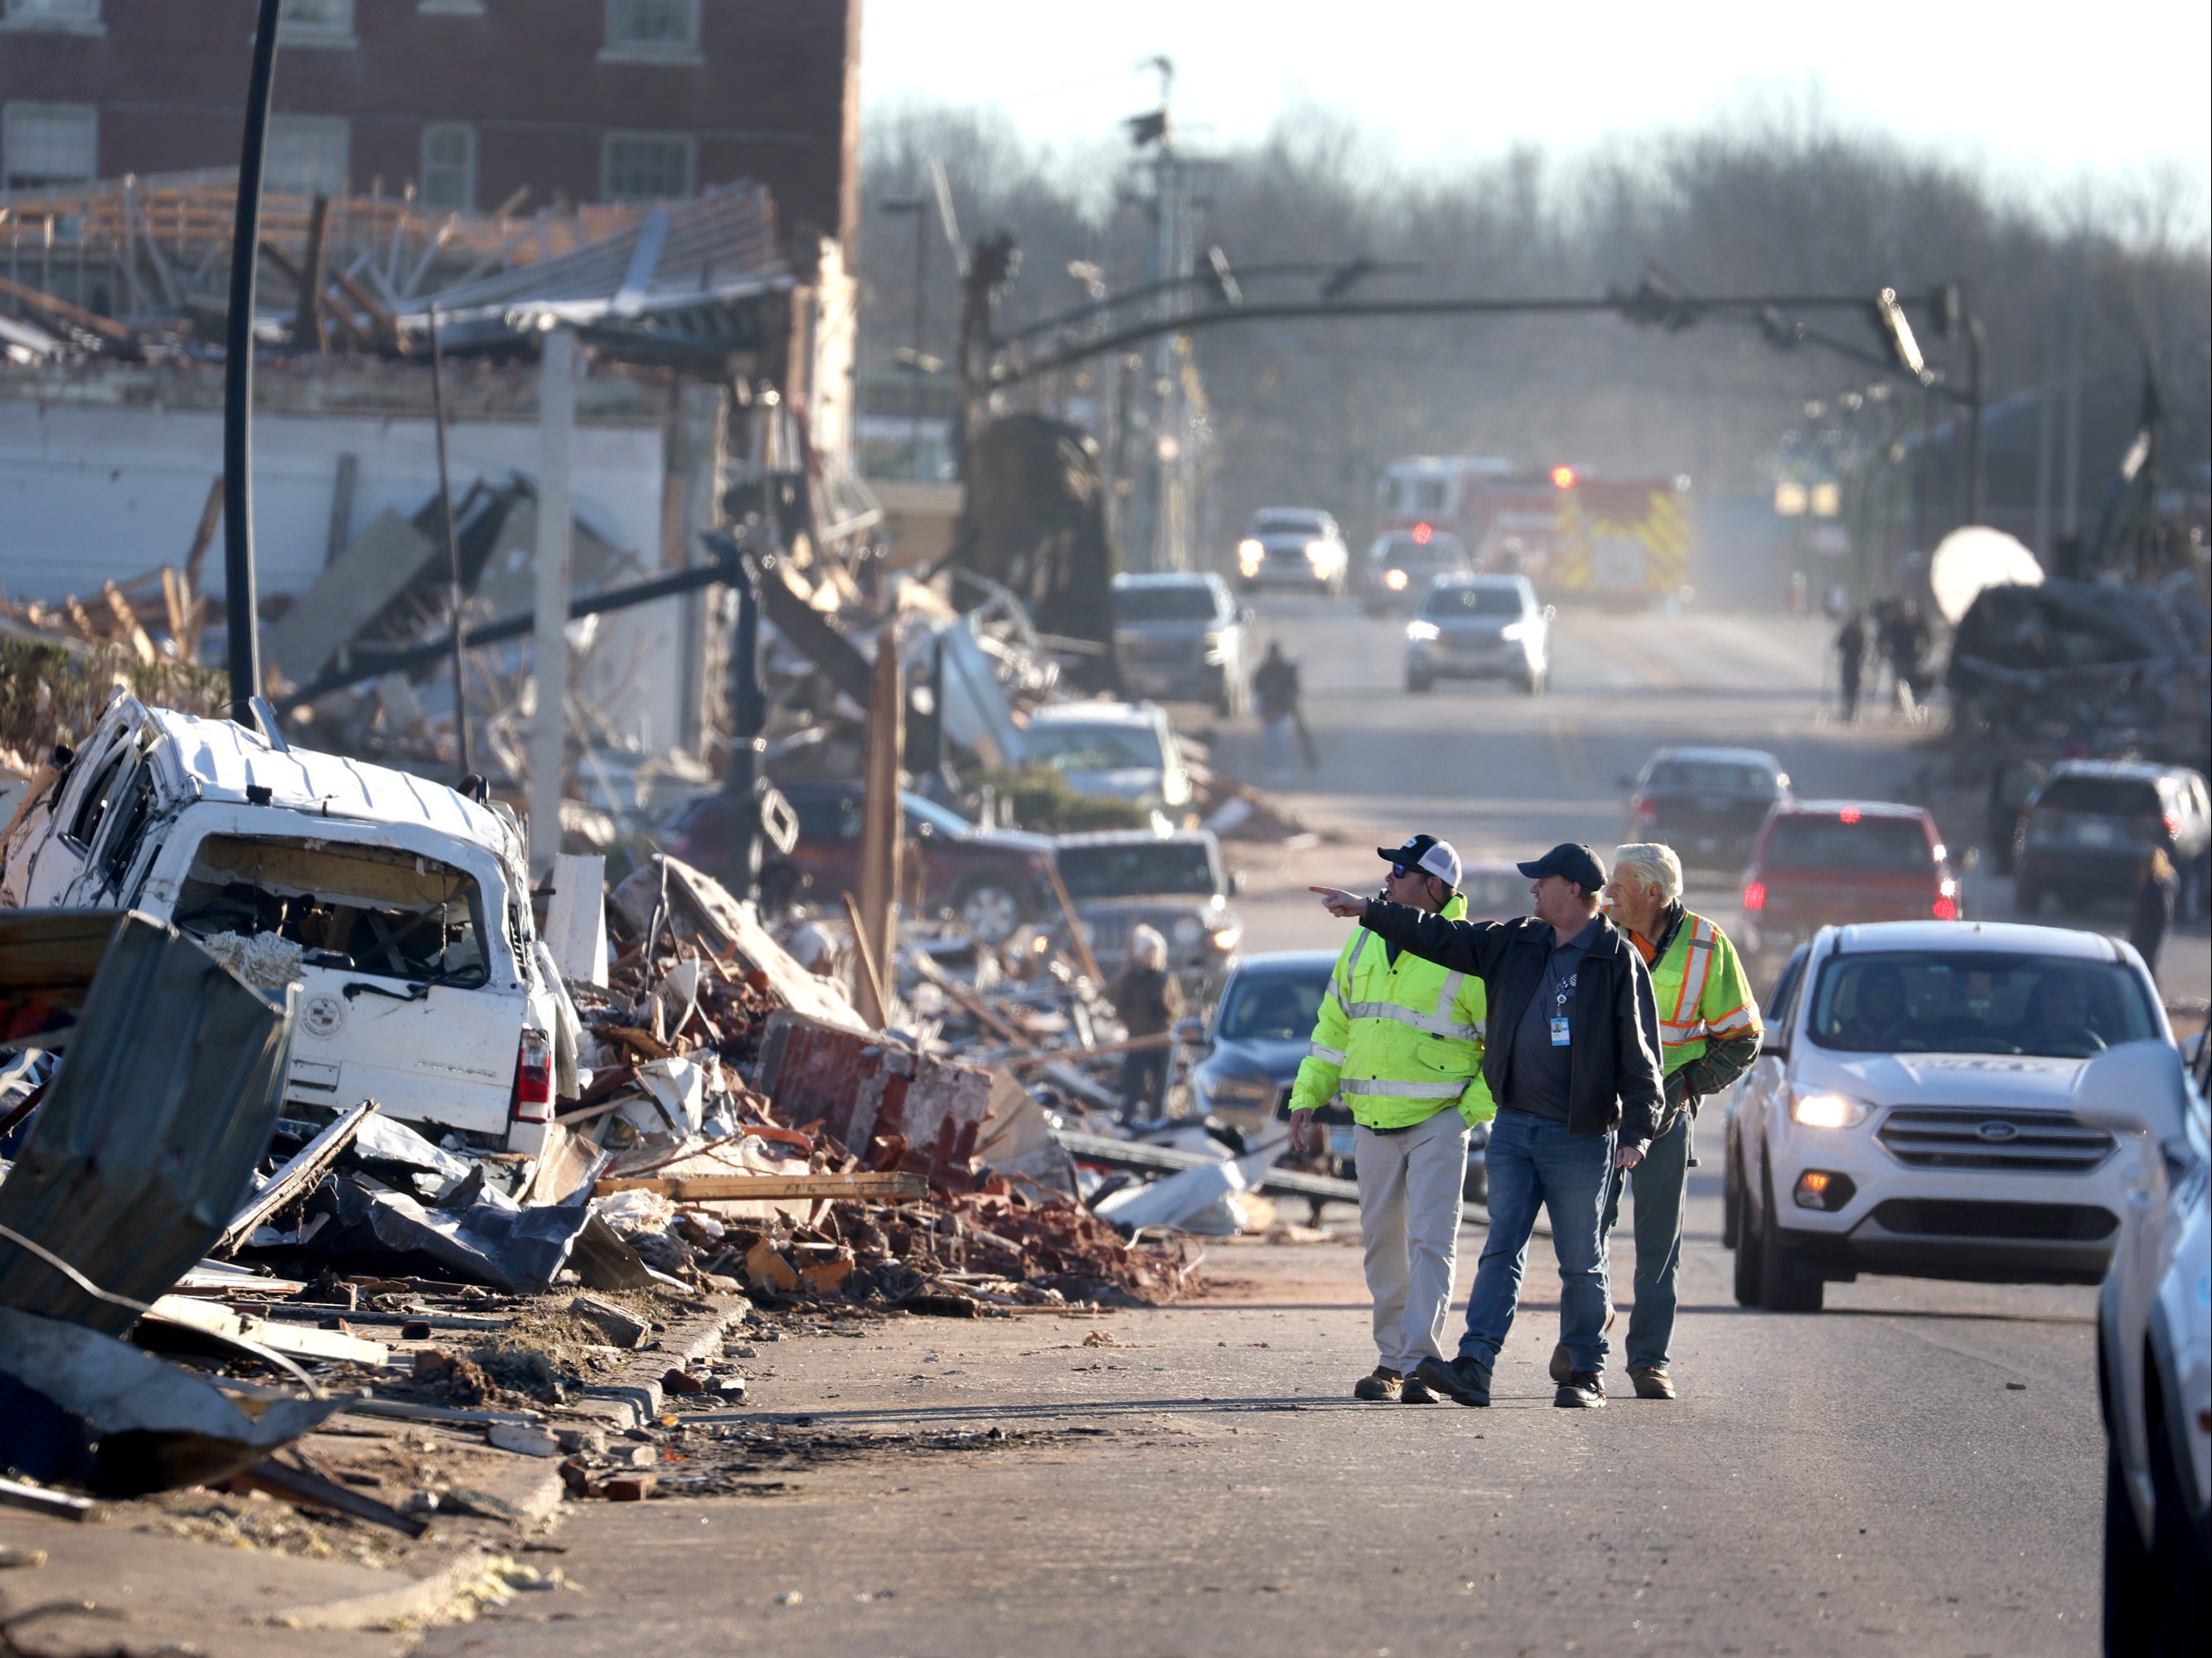 Homes and business are reduced to rubble after a tornado ripped through the area two days prior on 12 December 2021 in Mayfield, Kentucky